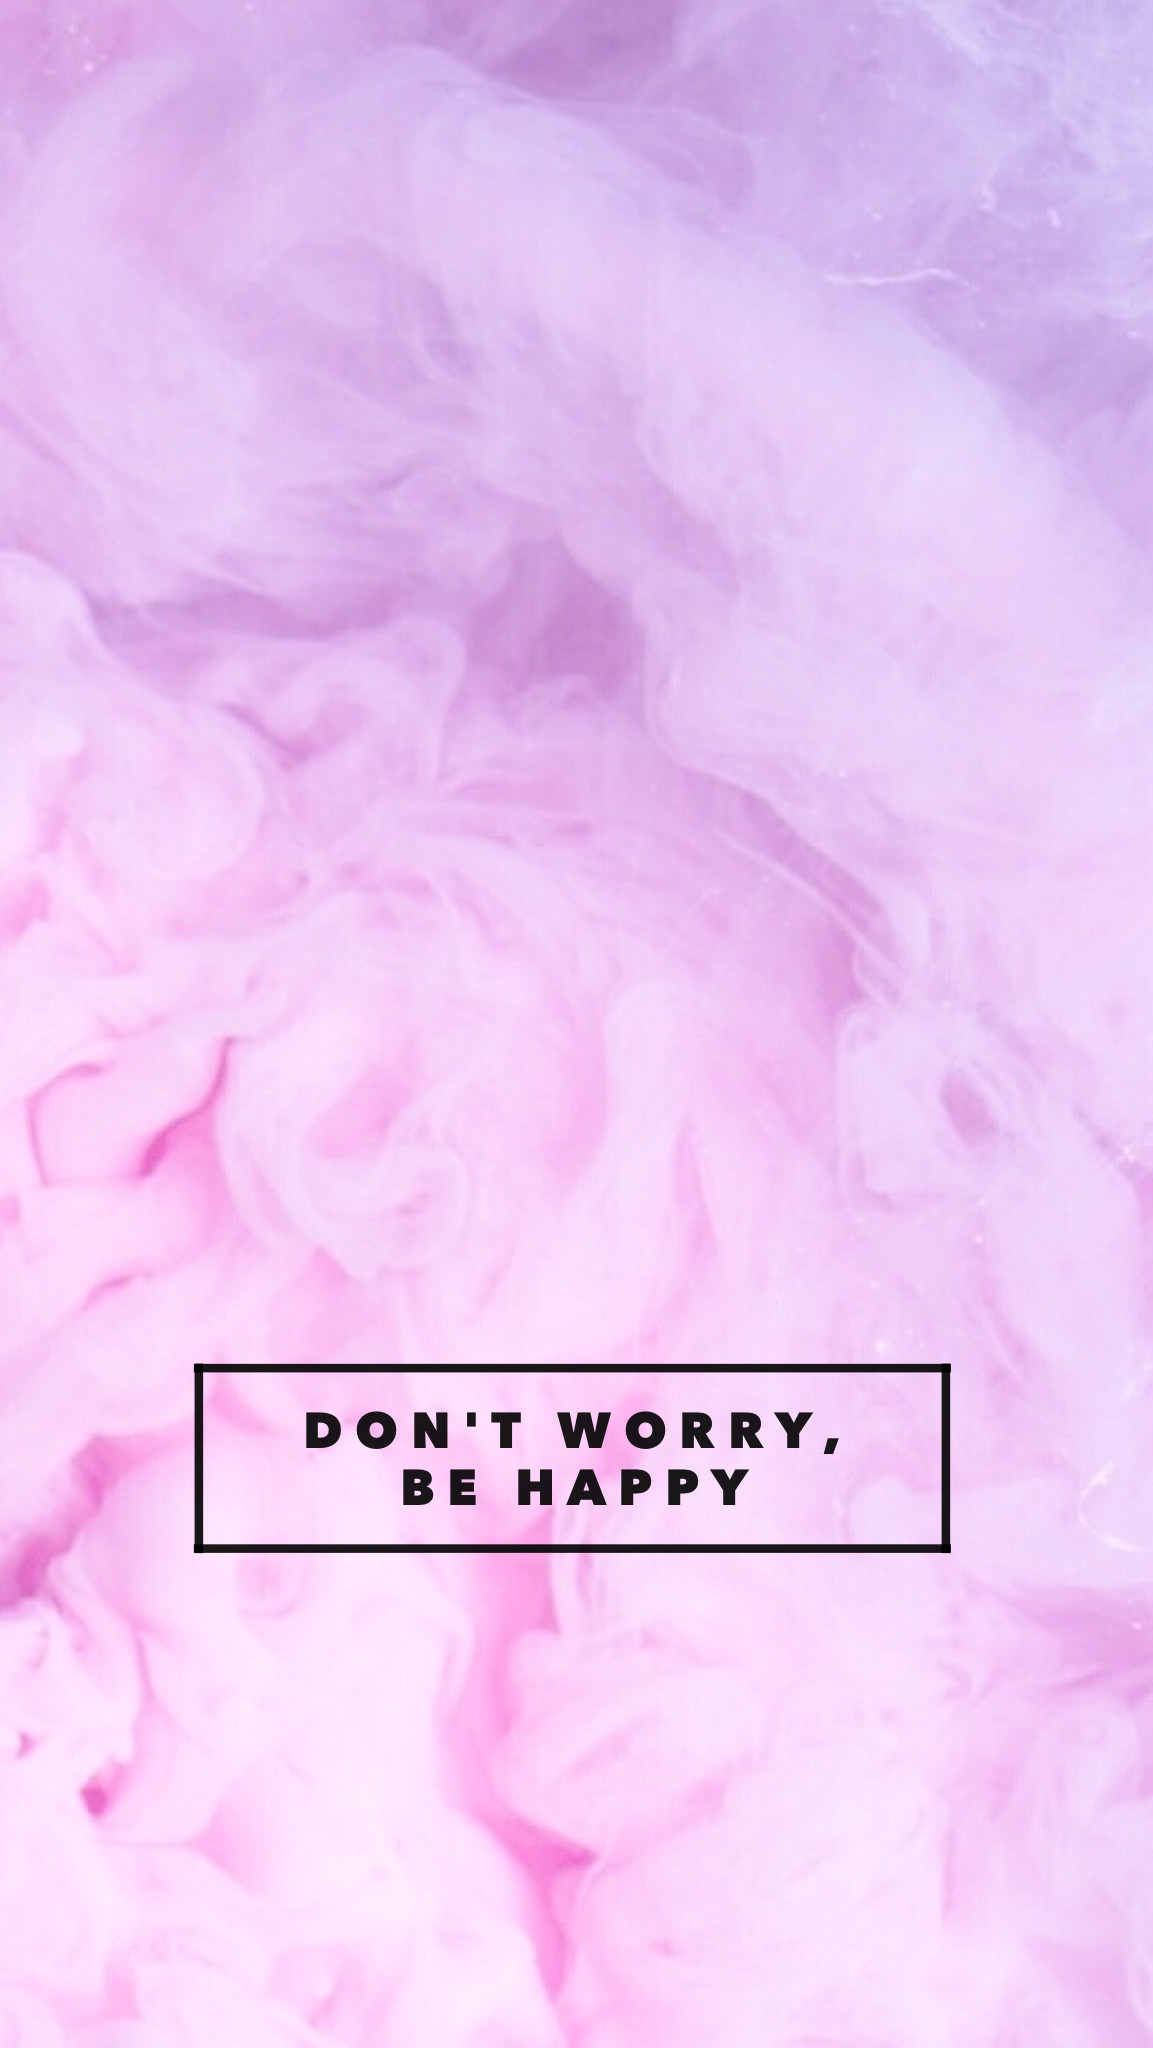 1153x2048 Wallpaper, background, iPhone, Android, HD, stones, pink, purple, candy,  original image not by me - just edited and quote added.